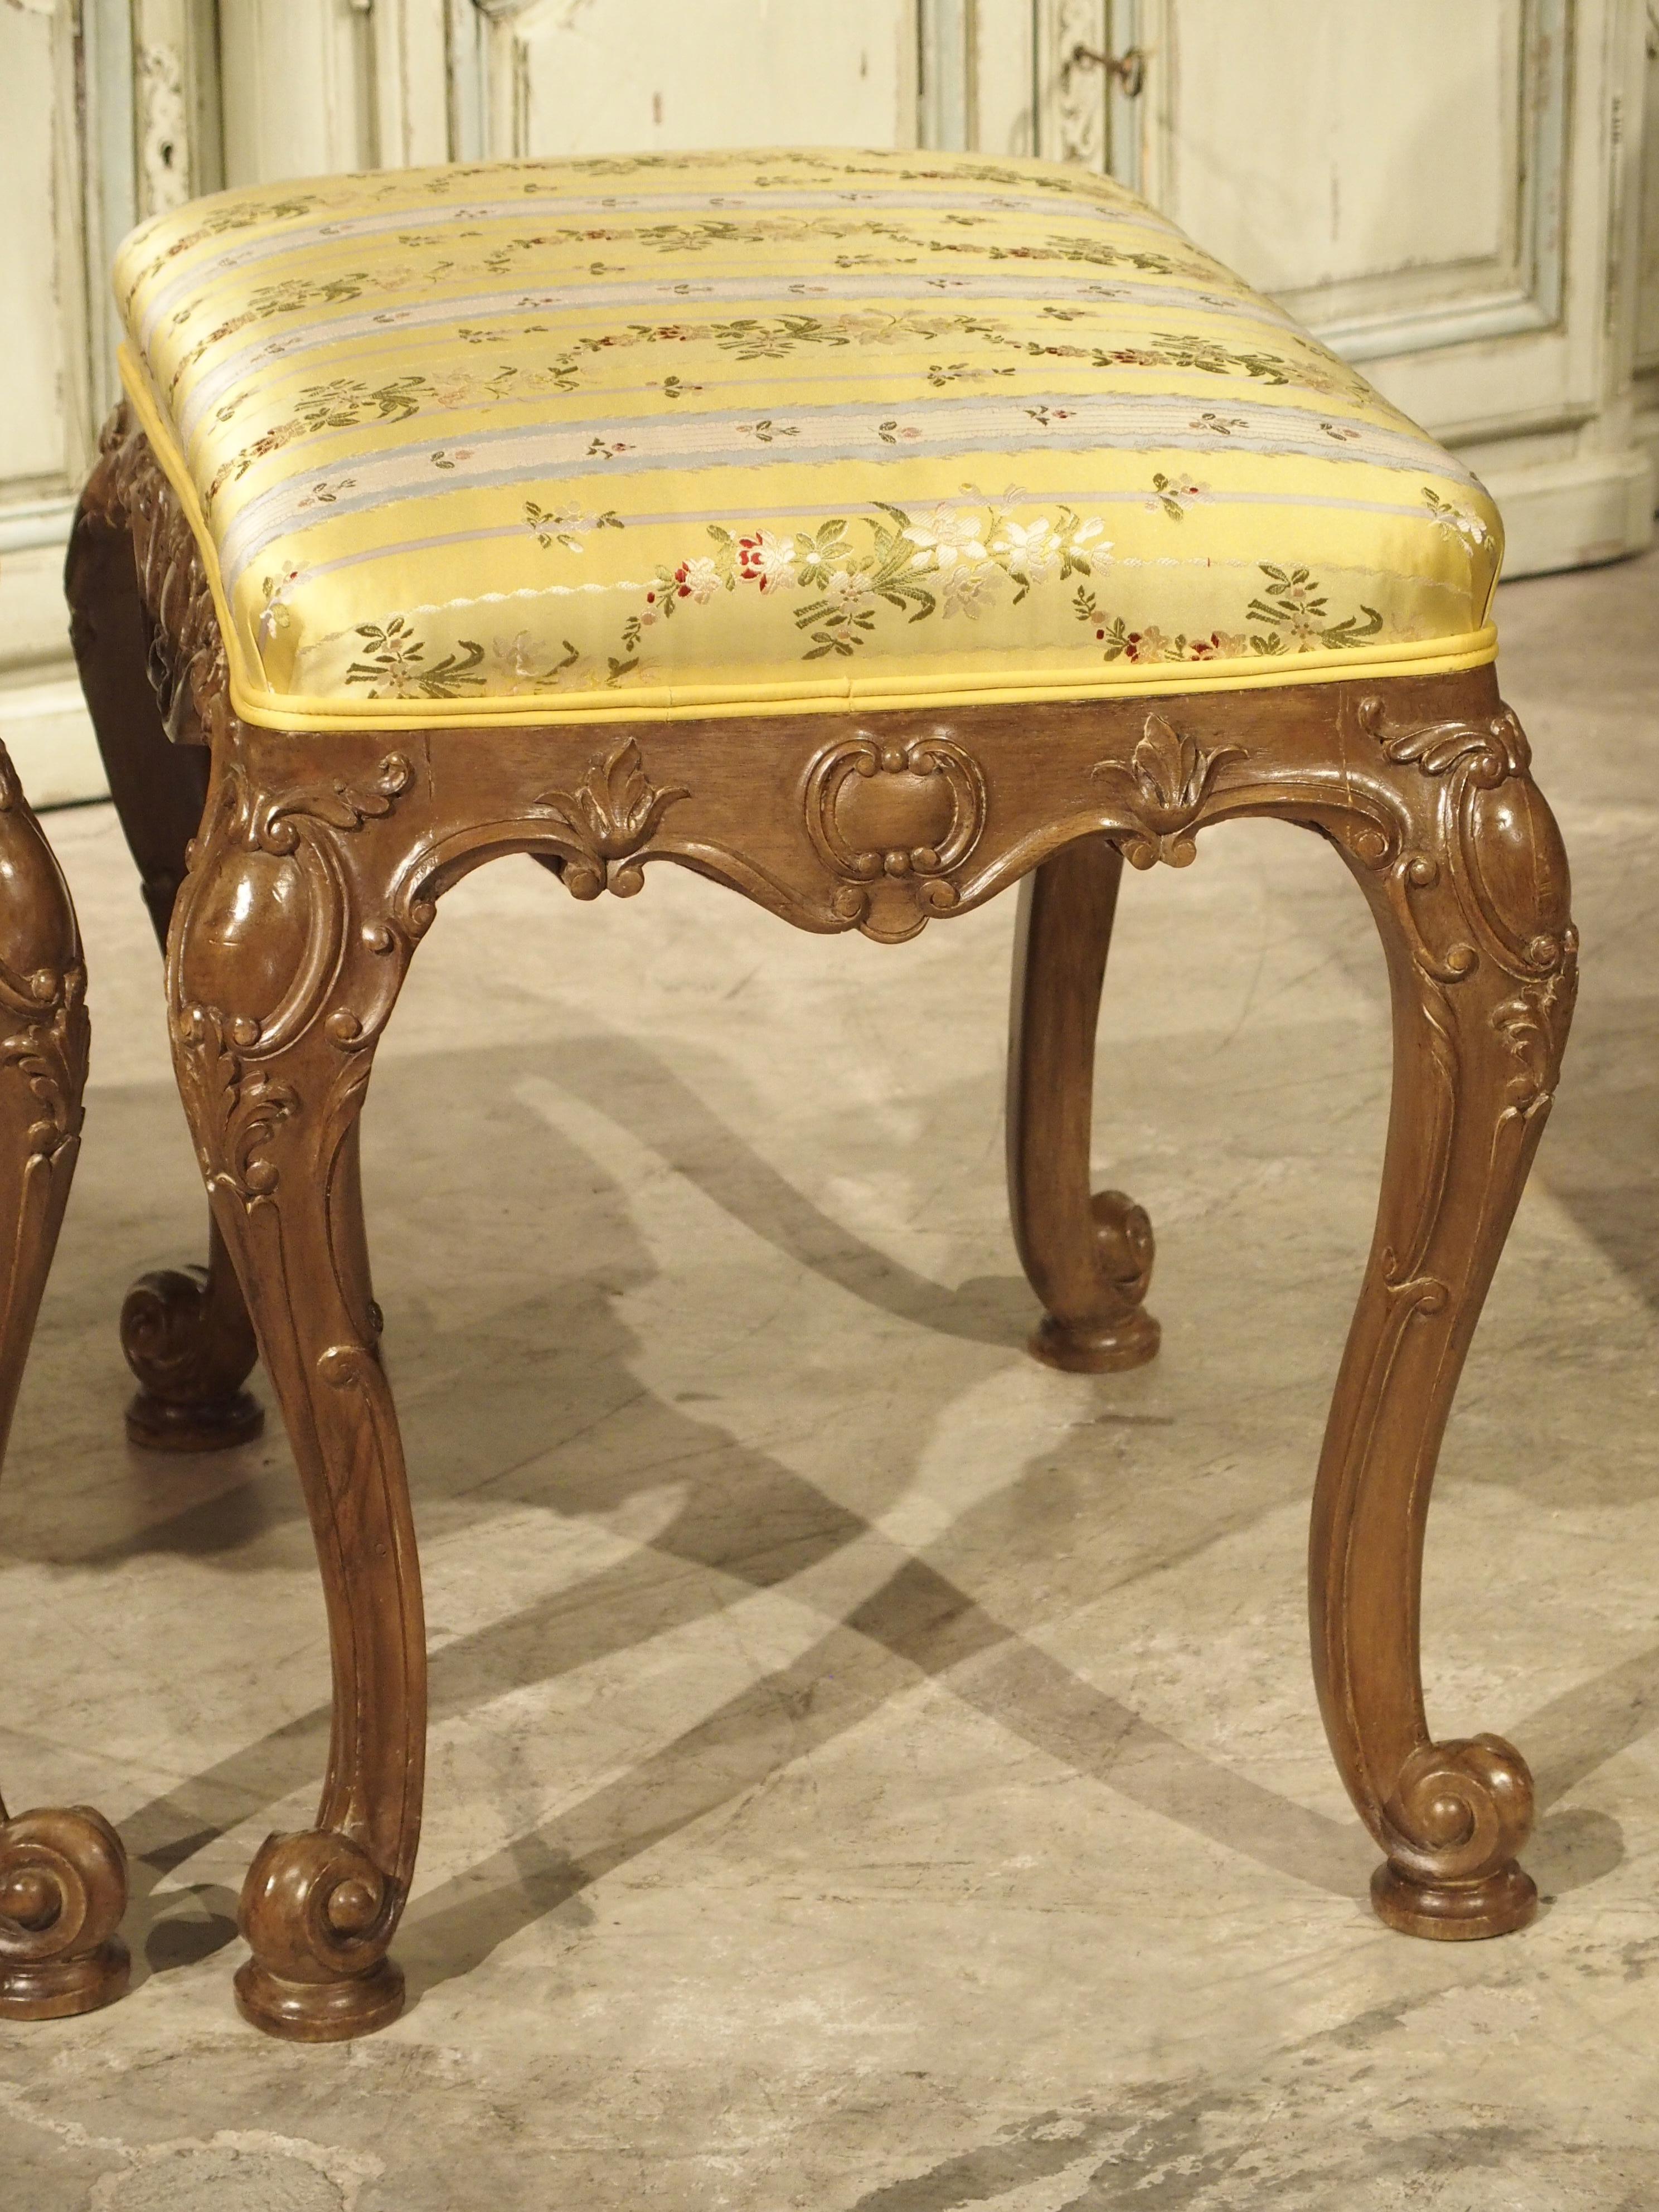 Pair of Well Carved French Louis XV Style Tabouret Stools with Silk Upholstery For Sale 7